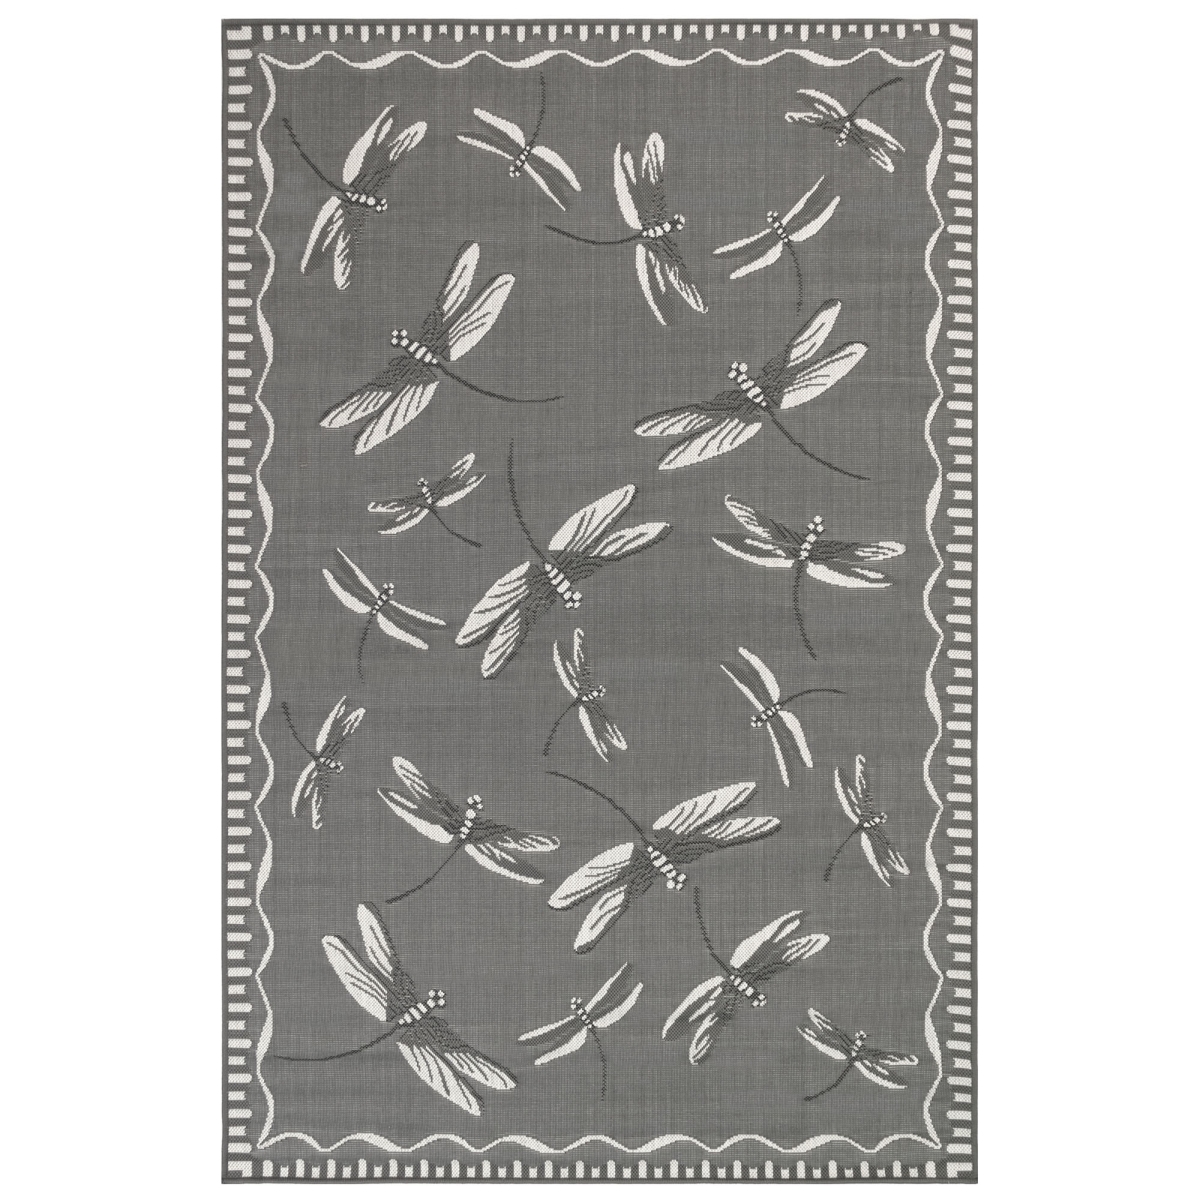 Cre80844097 Liora Manne Carmel Dragonfly Indoor & Outdoor Rug, Grey - 7 Ft. 10 In. X 9 Ft. 10 In.